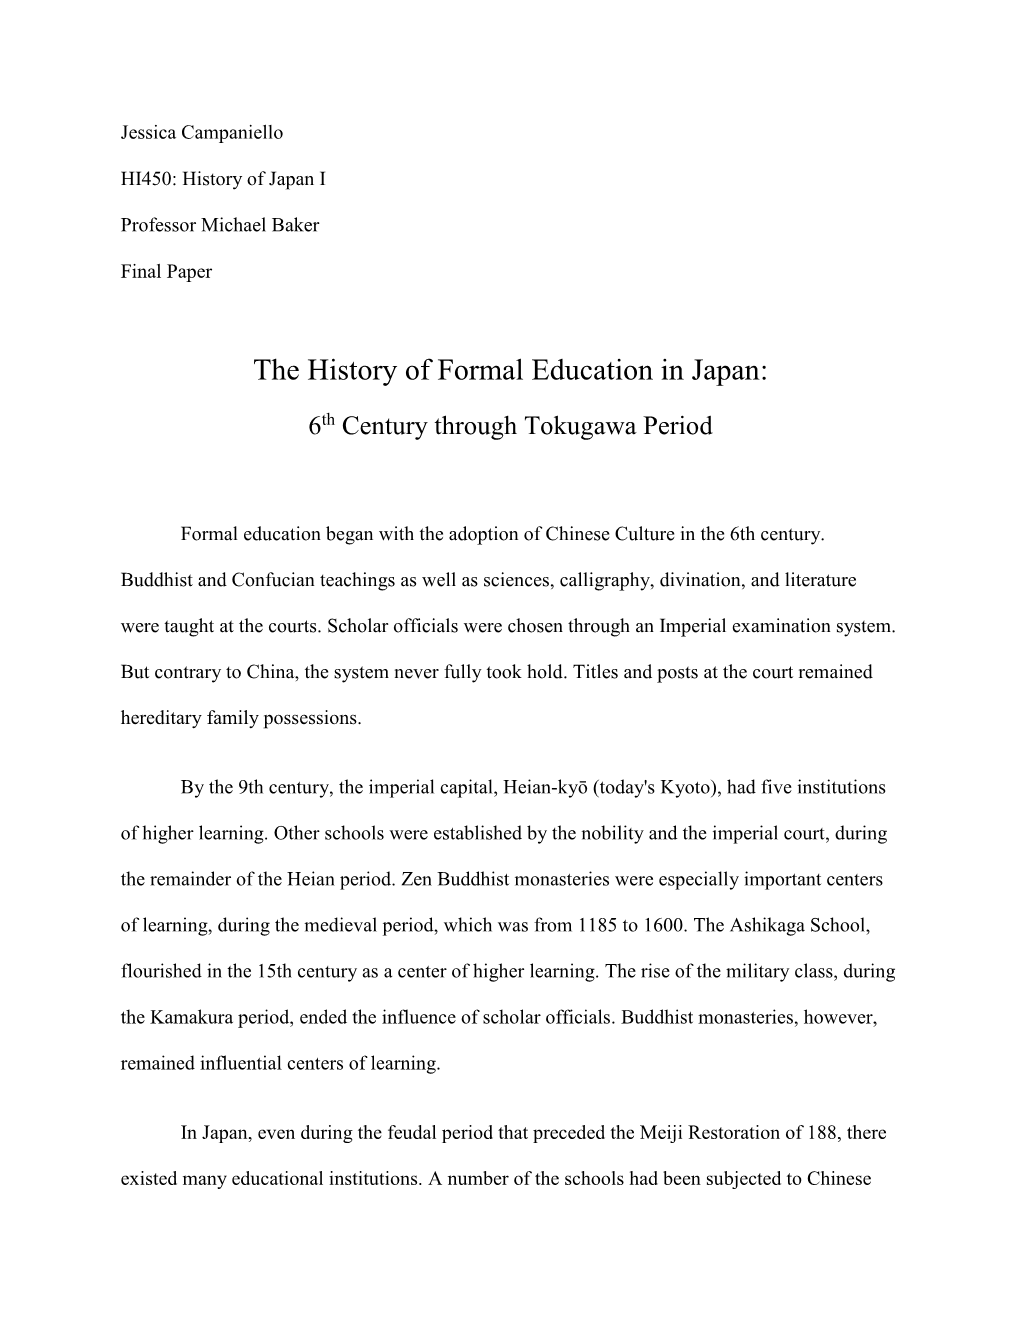 The History of Formal Education in Japan: 6Th Century Through Tokugawa Period